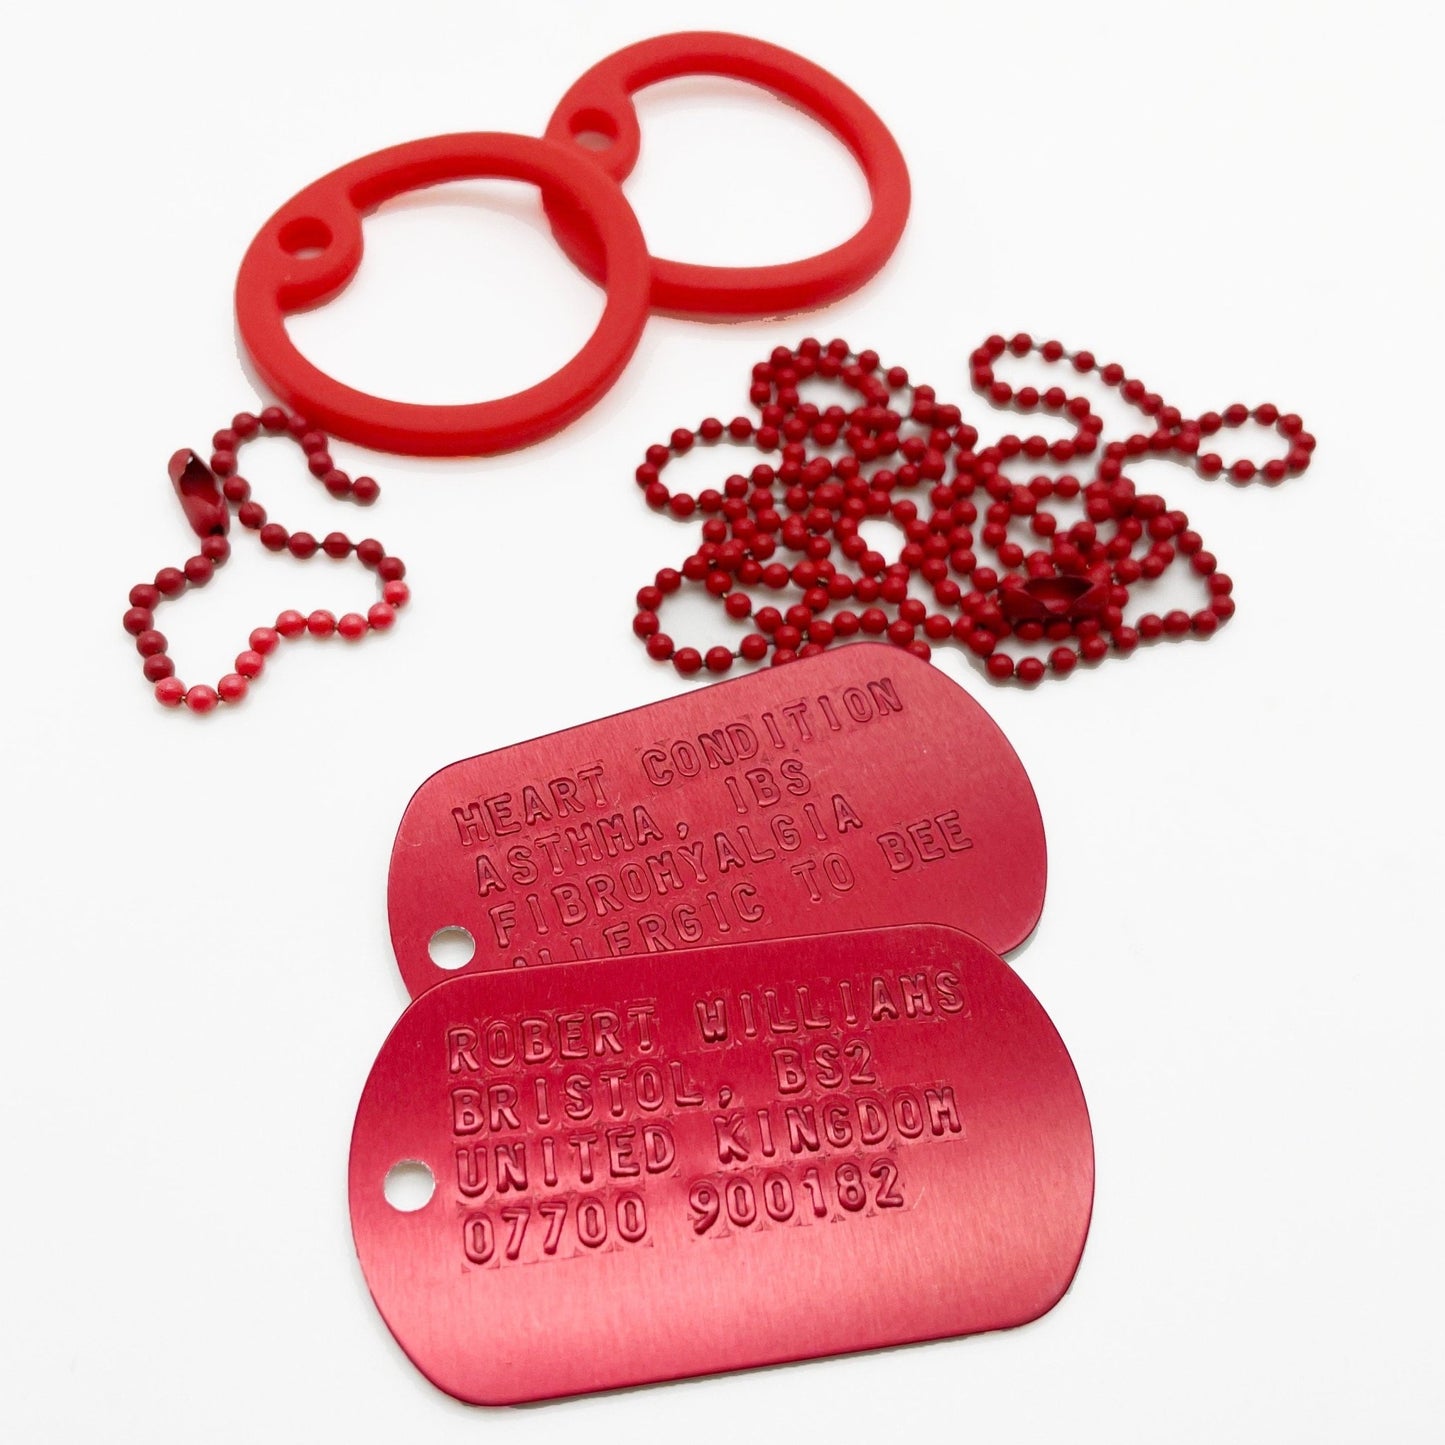 U.s. military set personalised army dog tags red anodized aluminium - chain & silencer included - made to order - TheDogTagCo